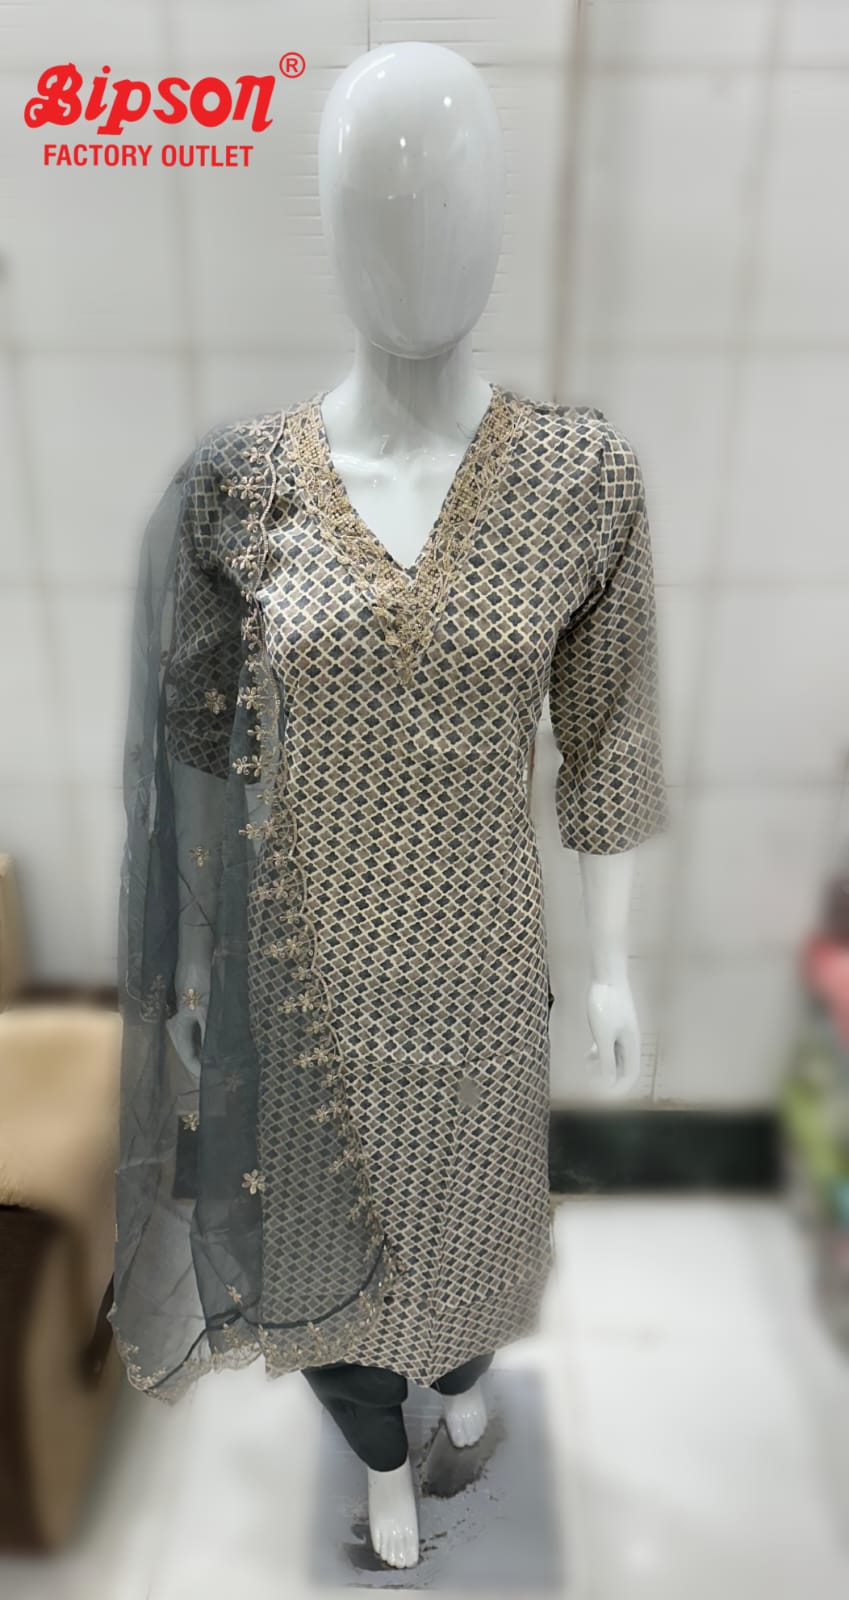 V Neck Bipson Prints Chanderi Readymade Pant Style Suits